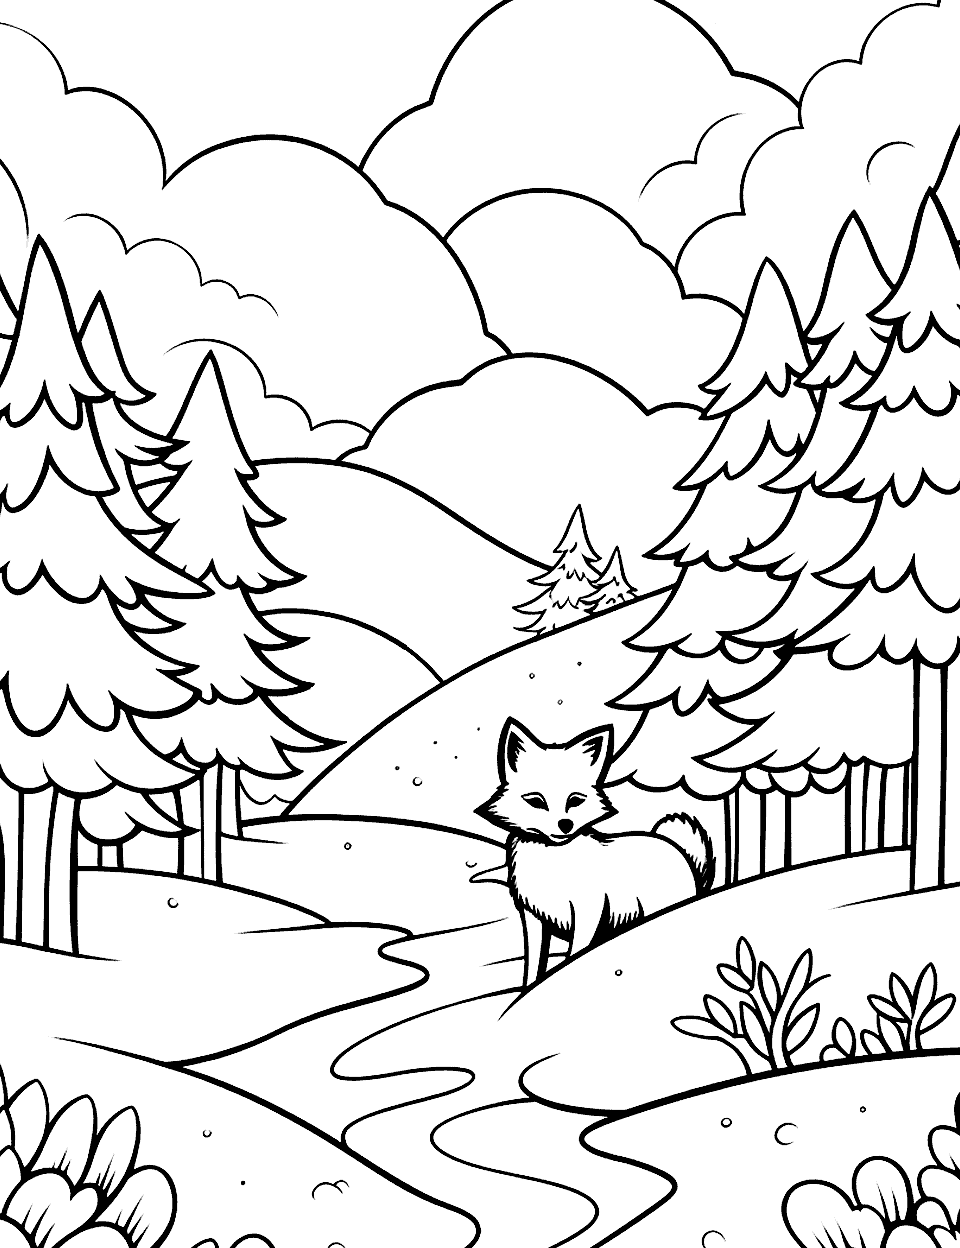 Fox in a Snowy Forest Coloring Page - A fox walking through a snowy forest with snow-covered trees.